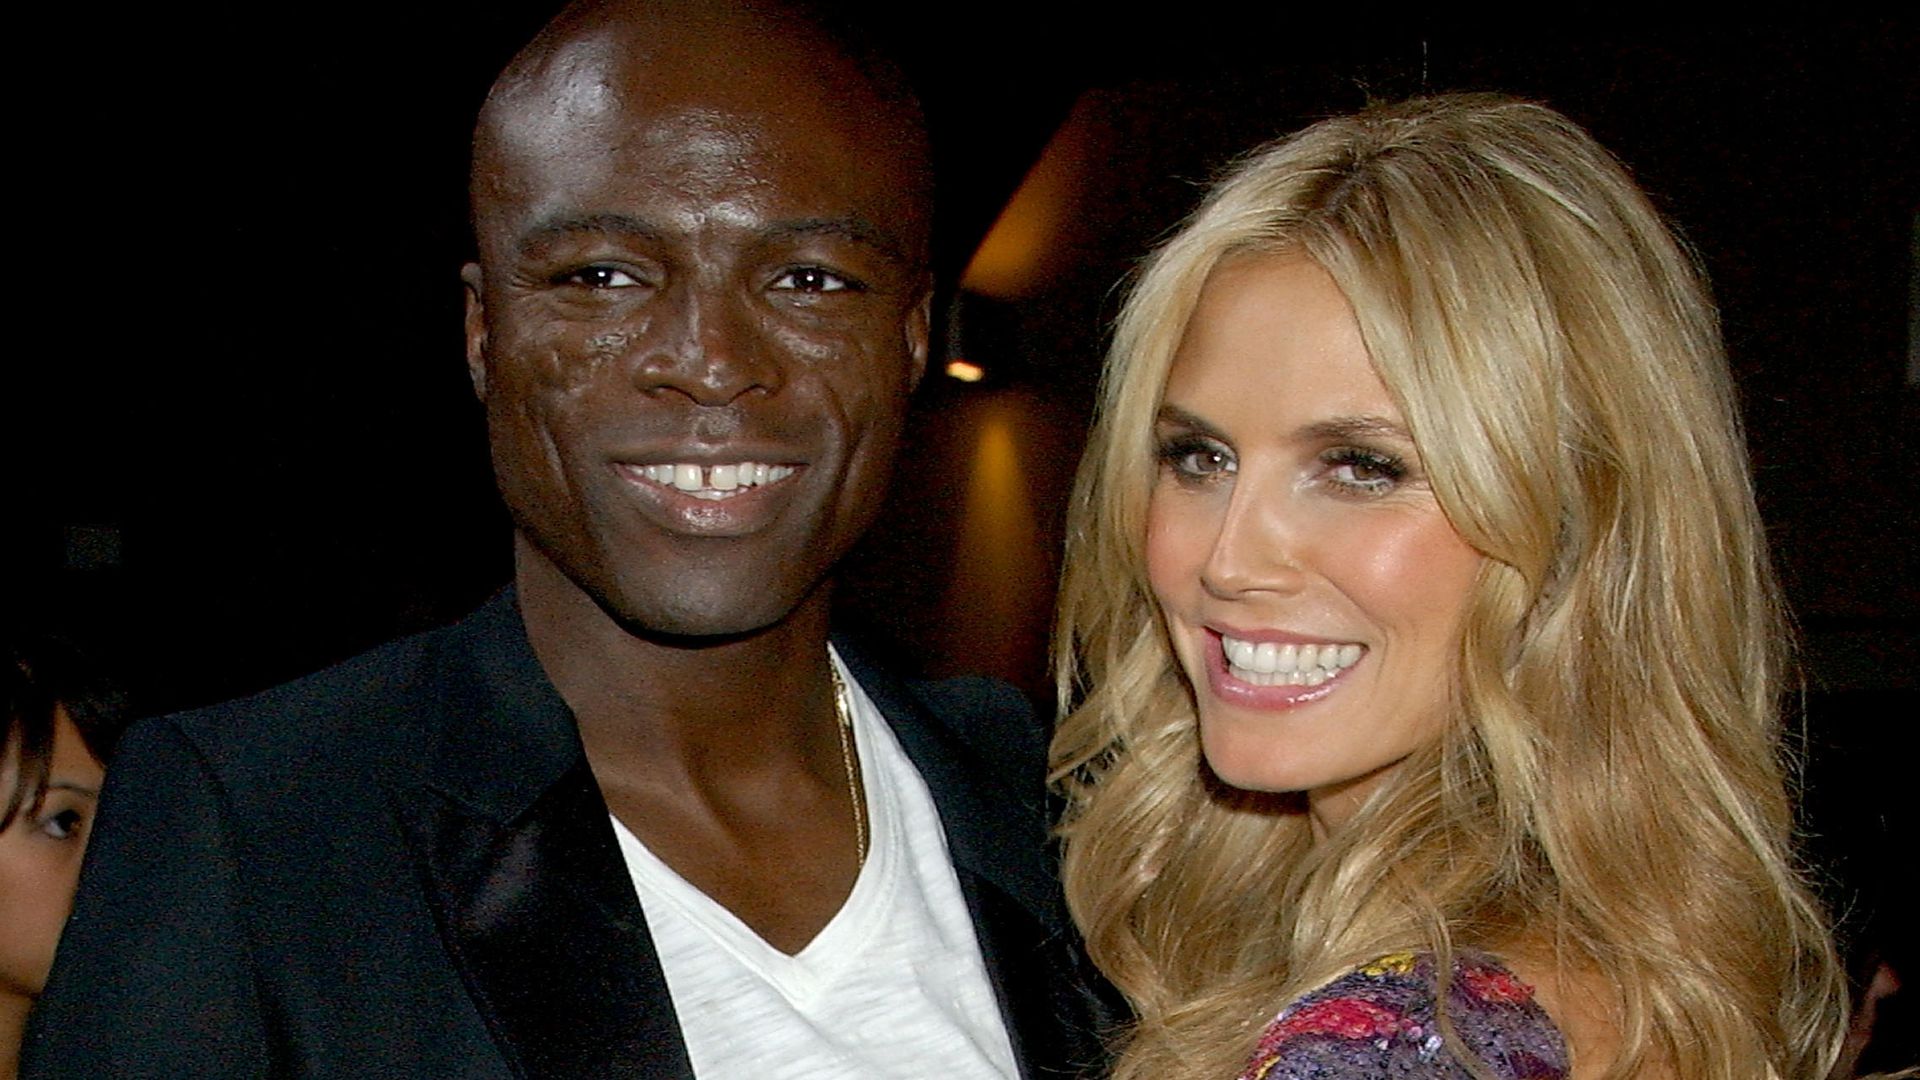 Heidi Klum and Seal posing on the red carpet 